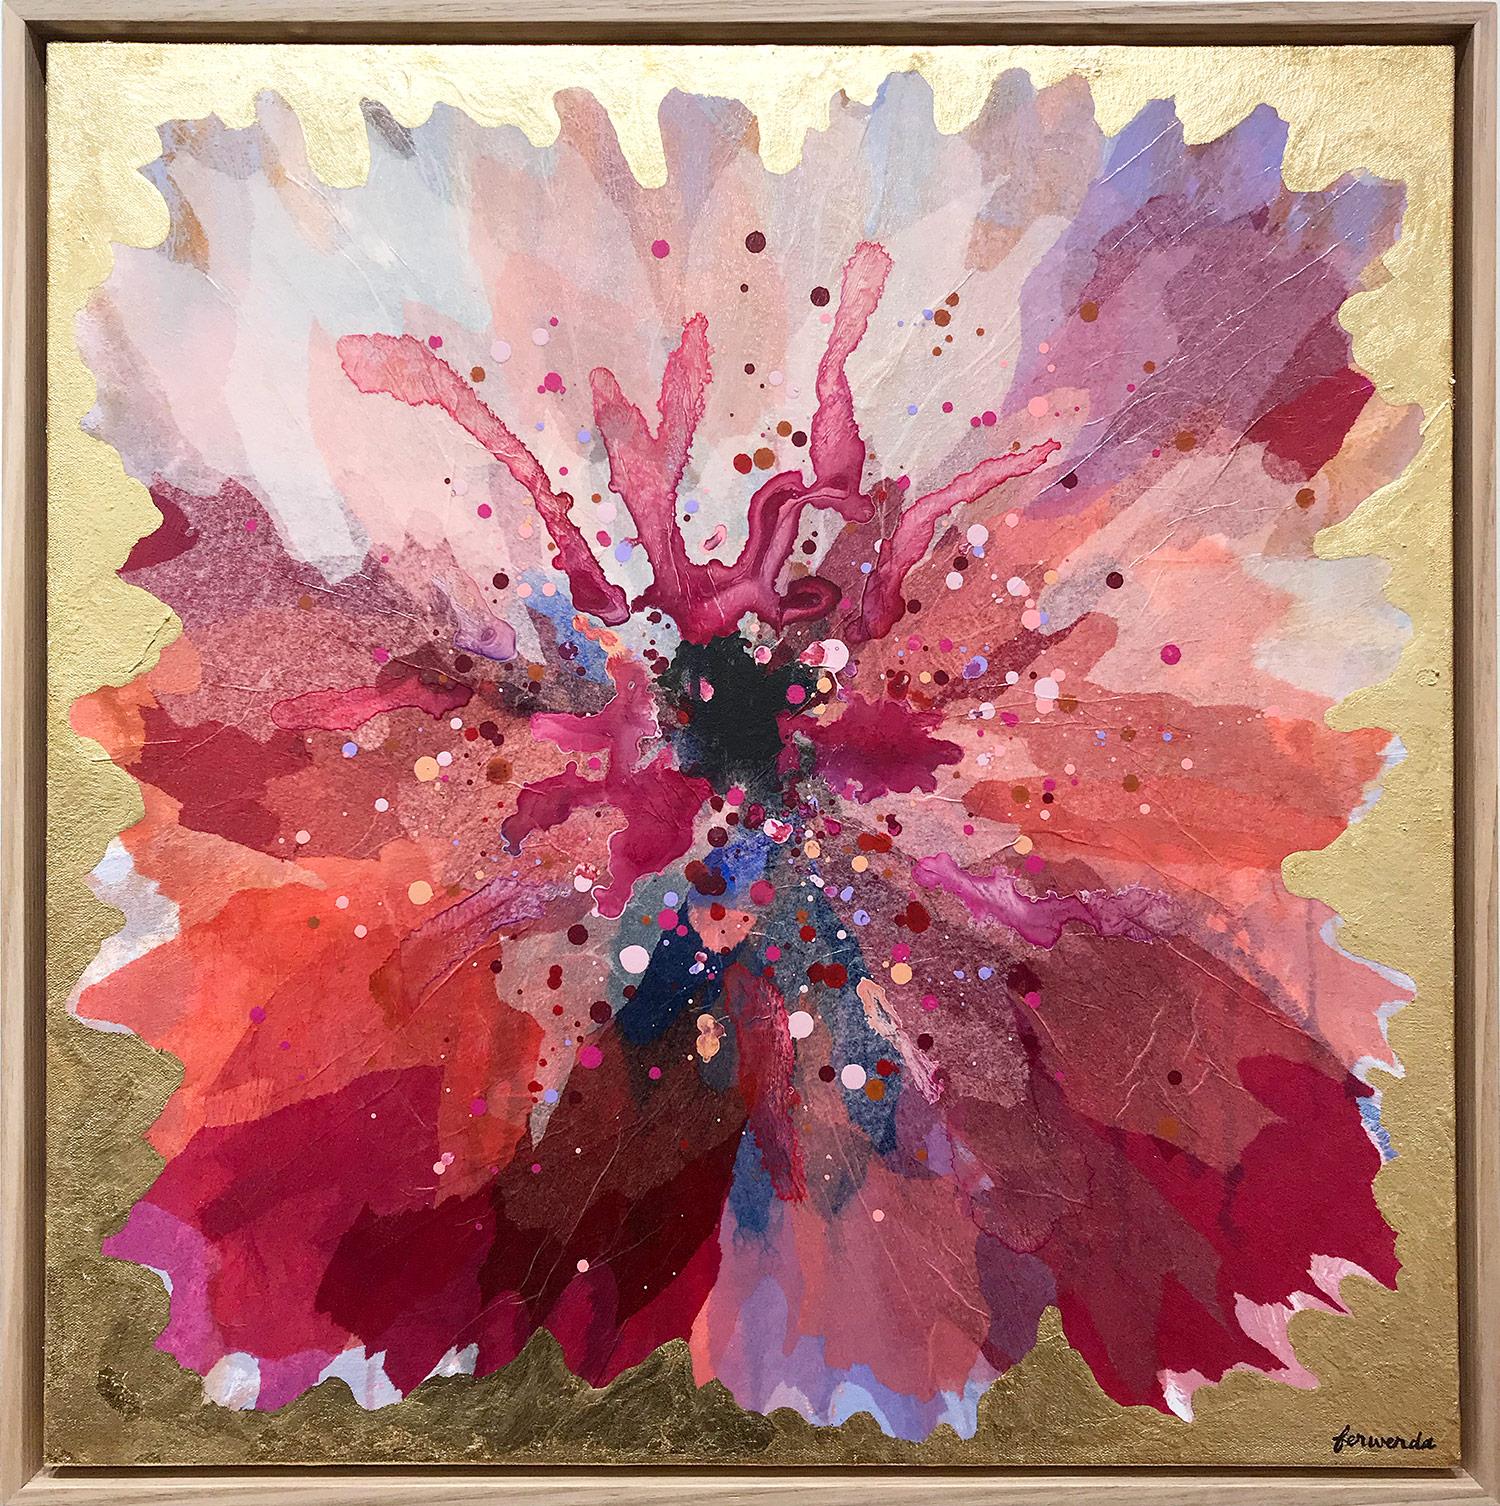 Antoinette Ferwerda Abstract Painting - "Wild Plum Hibiscus" Contemporary Layered Mixed Media Floral Painting on Canvas